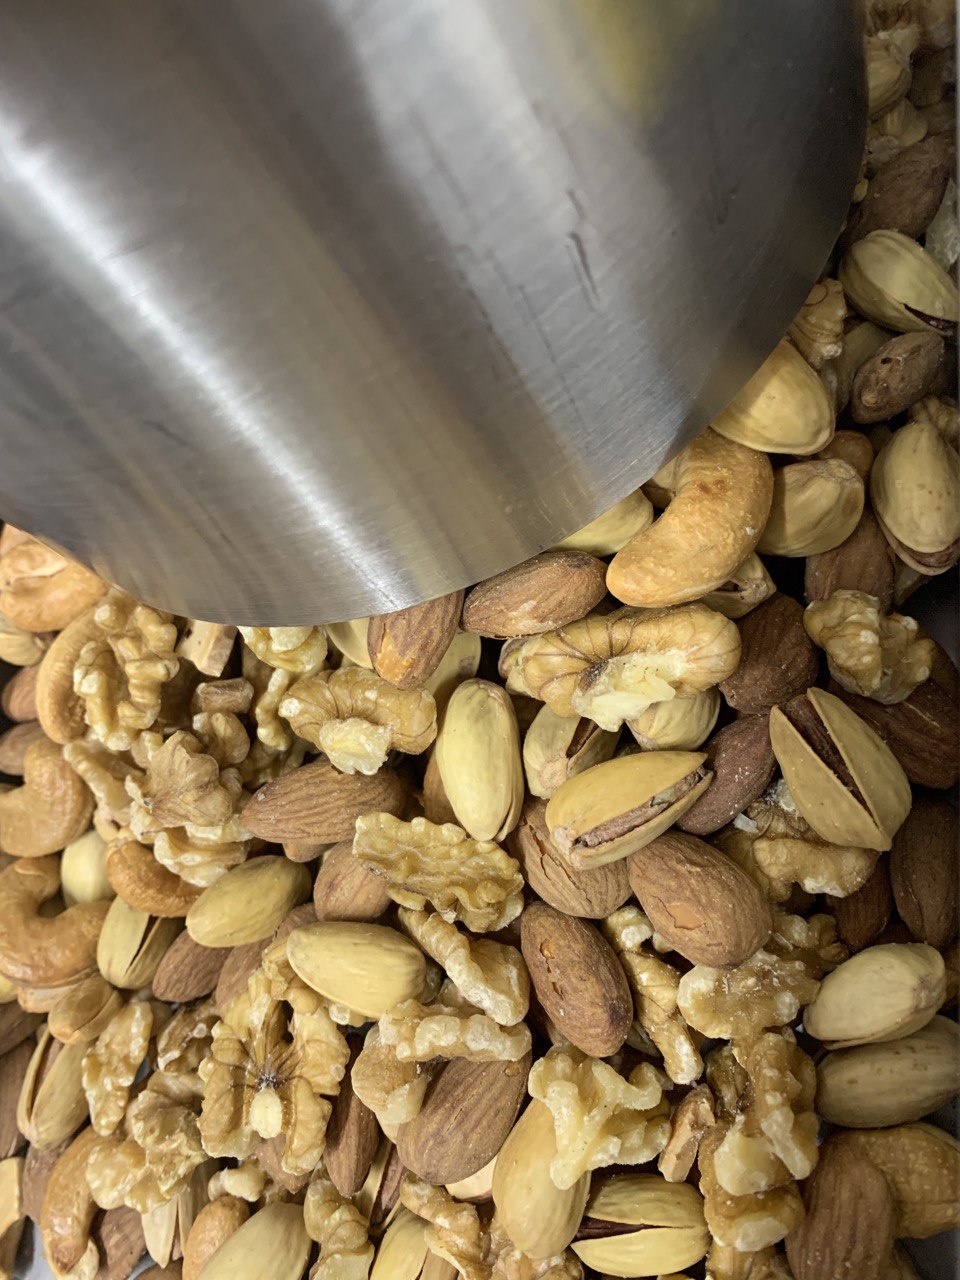 Snack On Nuts - Flexibility Mixed Nuts: Almonds, Cashews, Pistachios, Walnuts - Nutrient Dense, Omega 3 nut, Magnesium Dense Snacks with Numerous Health Benefits